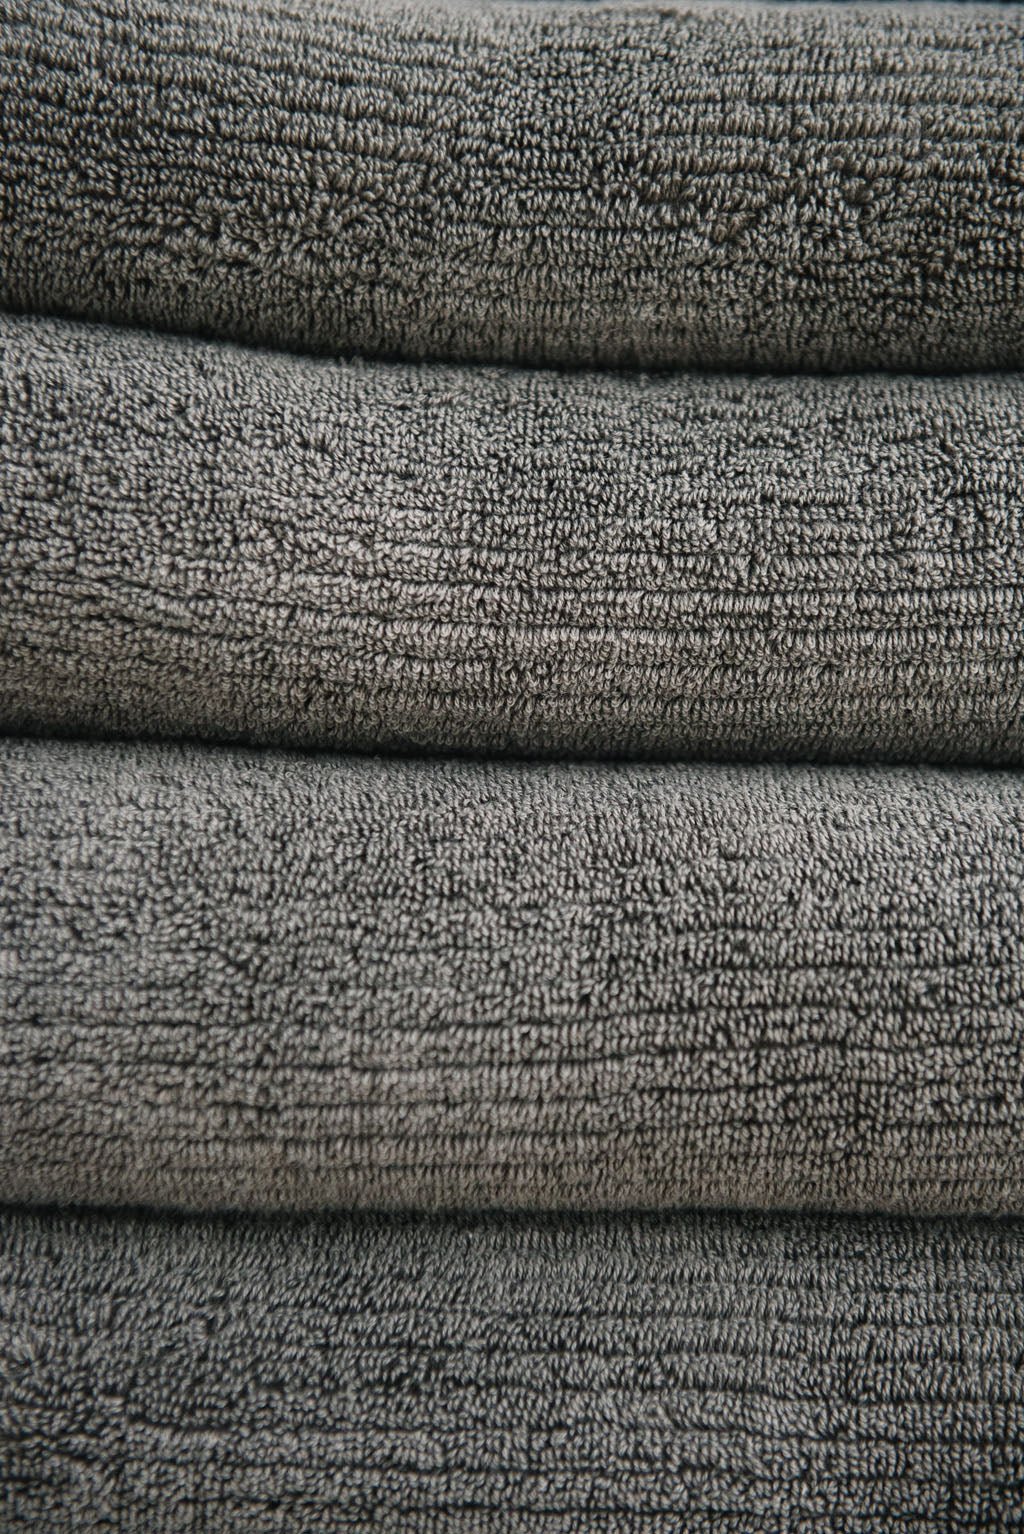 Ribbed Terry Bath Sheets in the color Charcoal. Photo of product taken up close. |Color:Charcoal